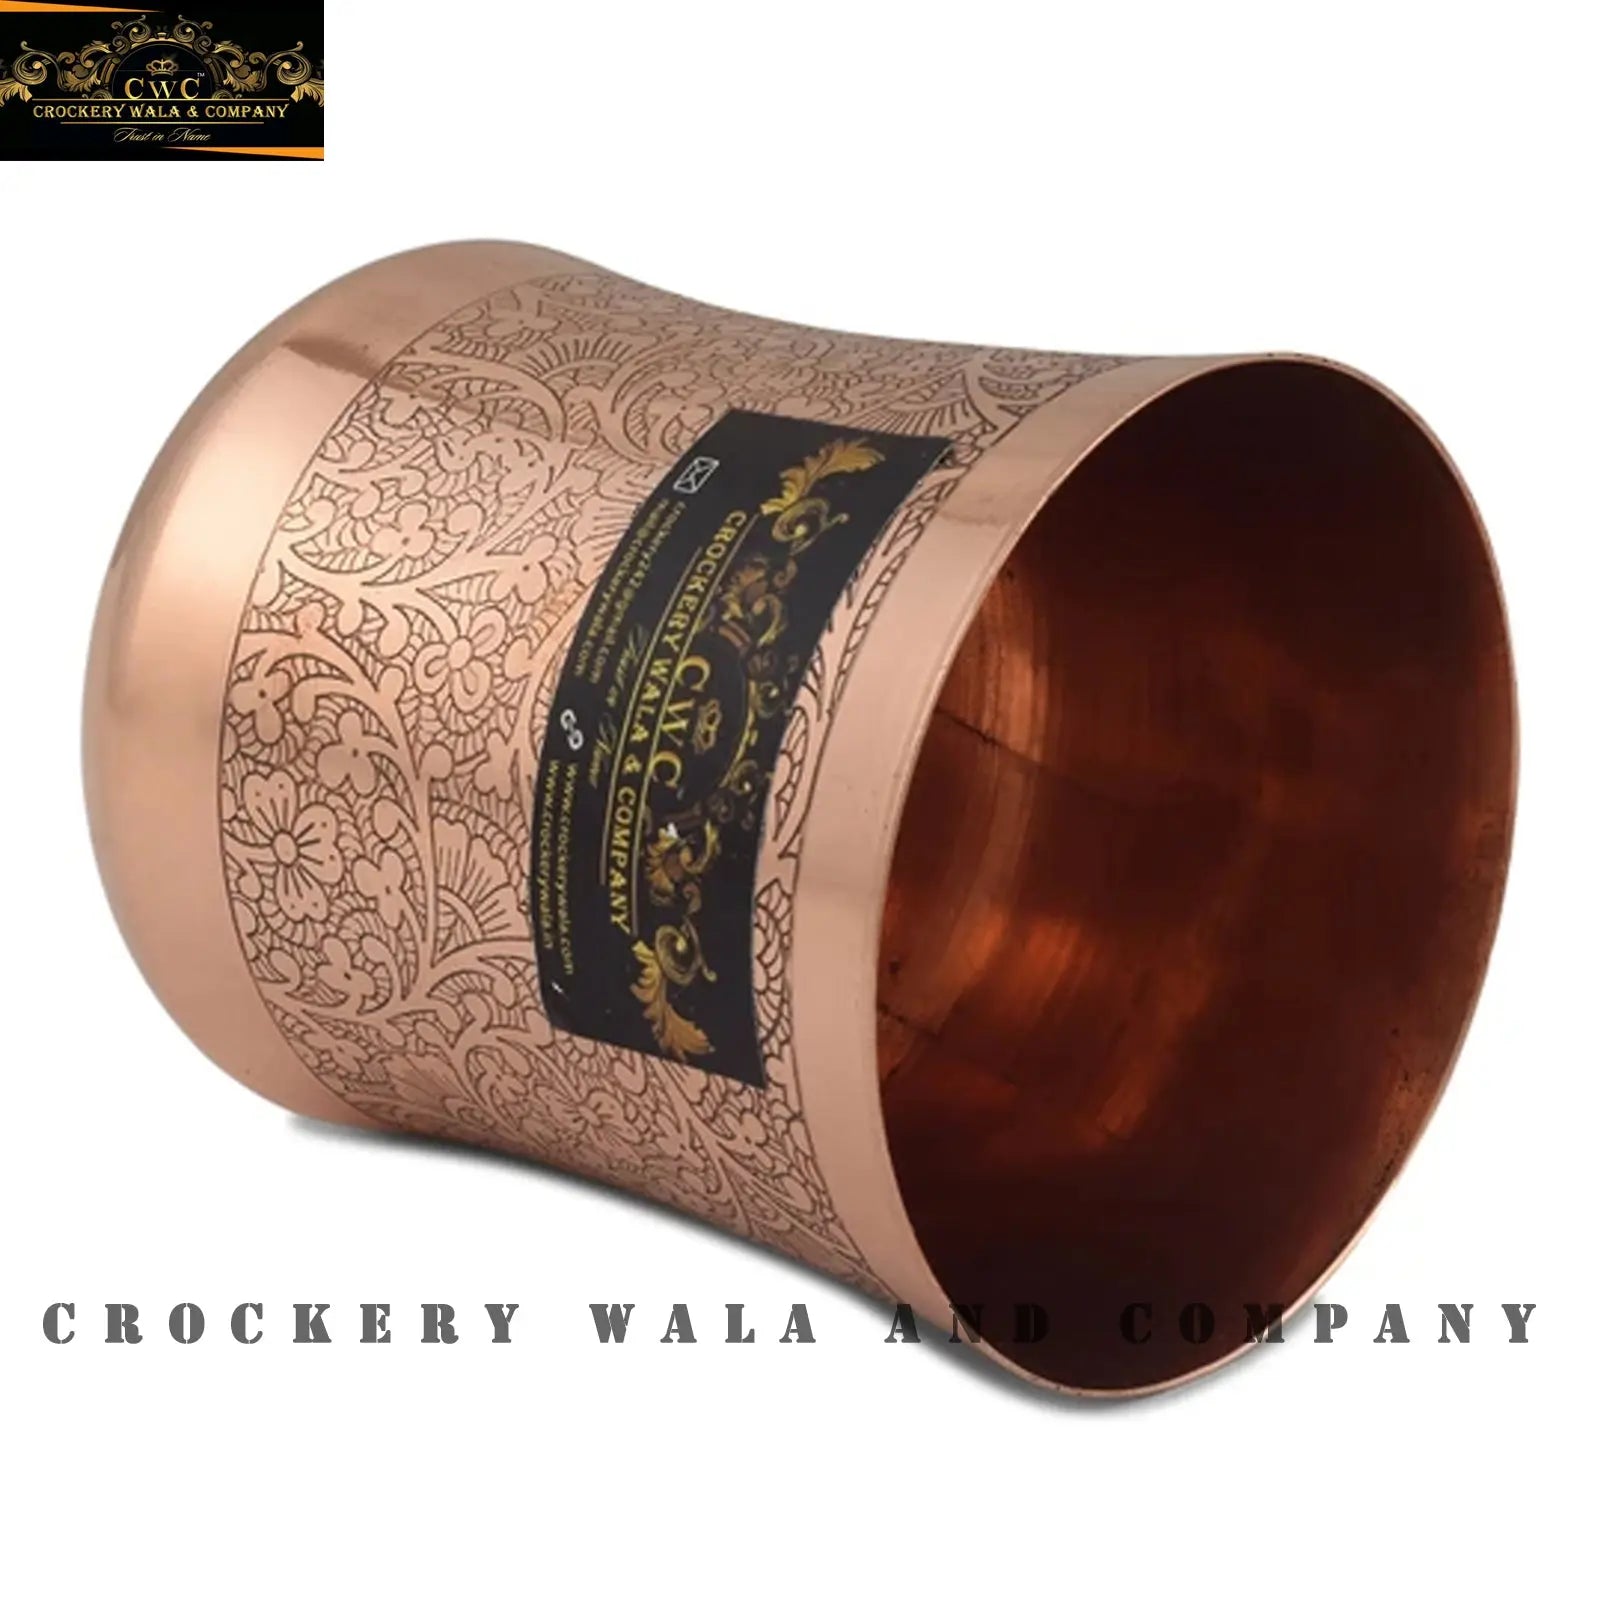 Pure Copper Glass Curve Itching - CROCKERY WALA AND COMPANY 